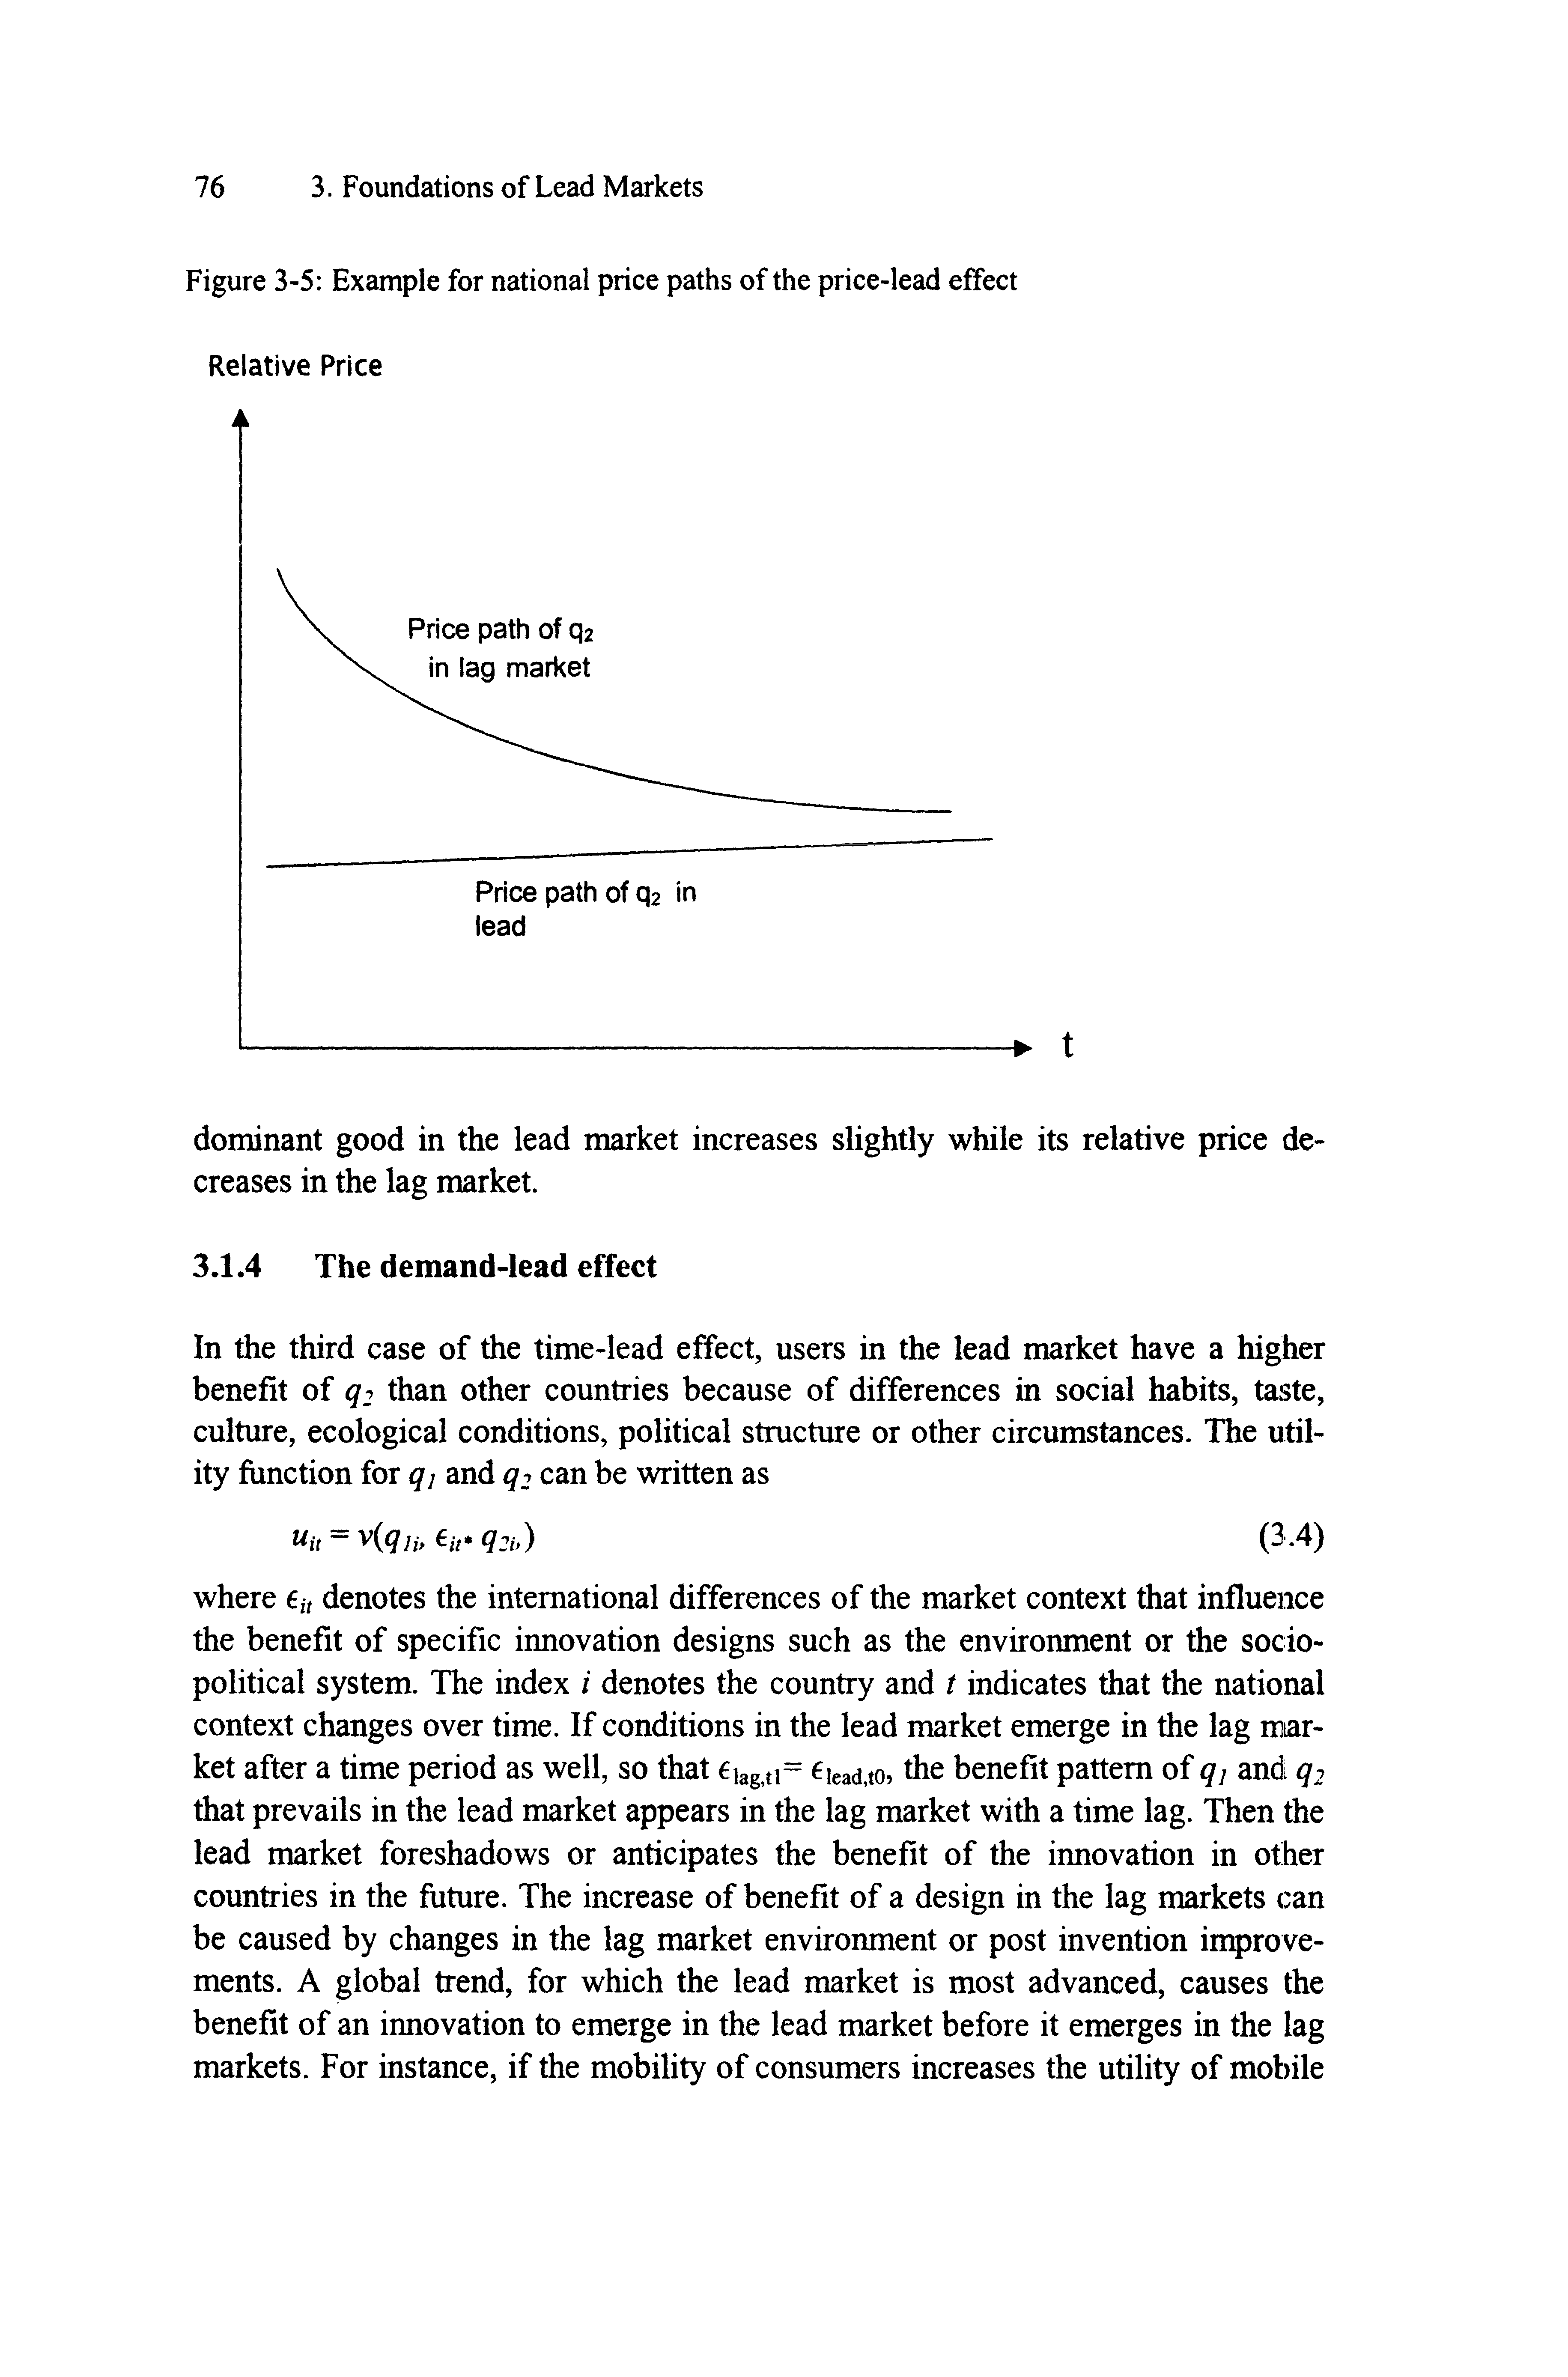 Figure 3-5 Example for national price paths of the price-lead effect...